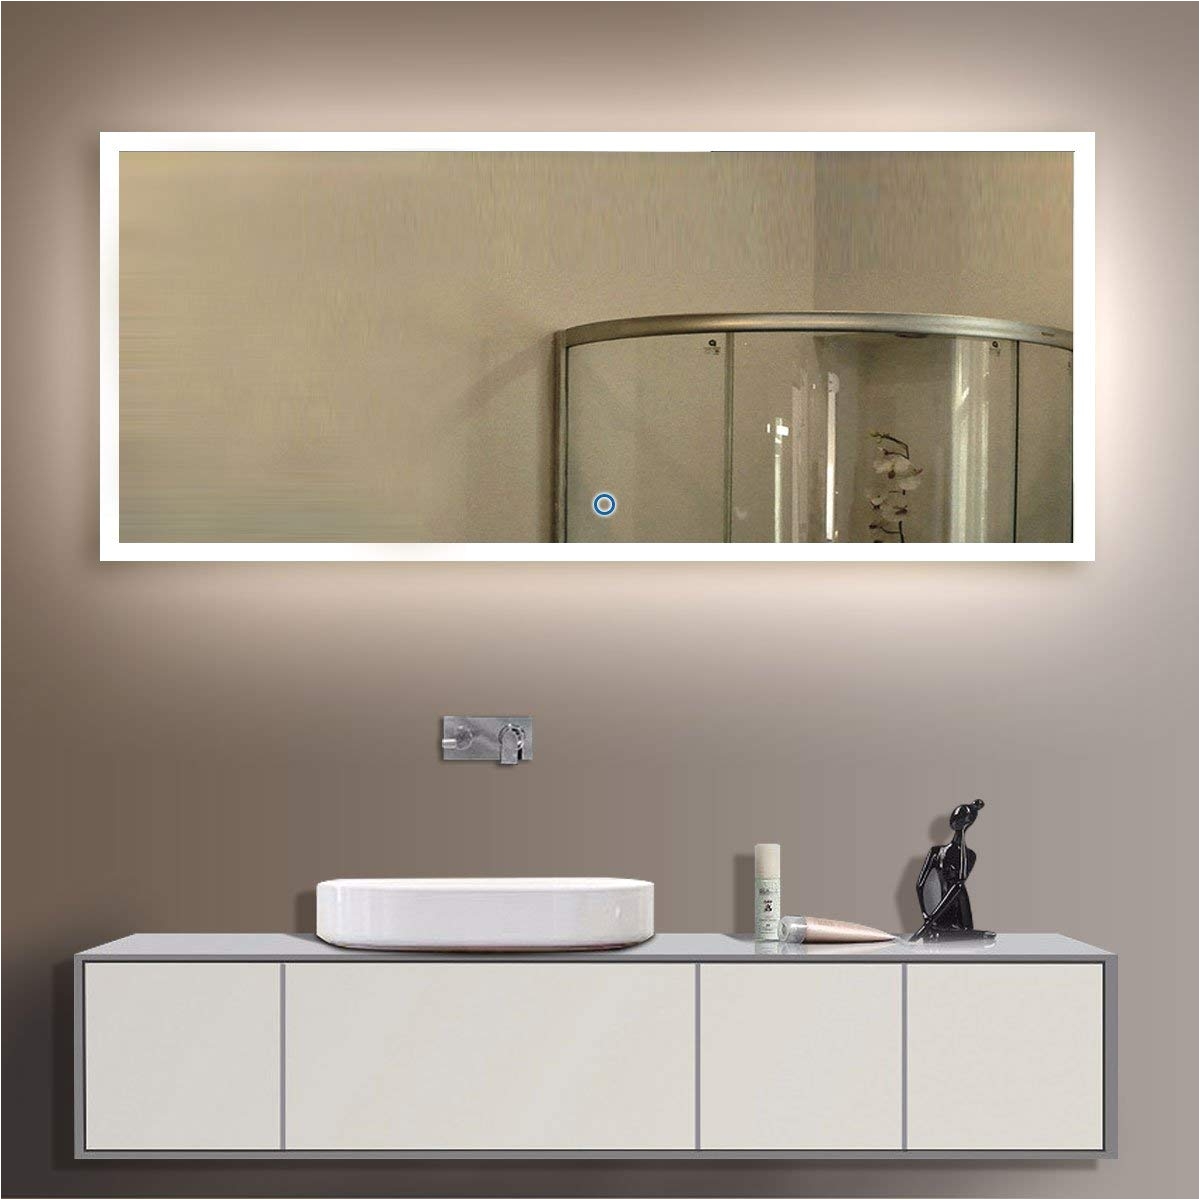 amazon com decoraport 84 inch 40 inch horizontal led wall mounted lighted vanity bathroom silvered mirror with touch button a n031 a home kitchen